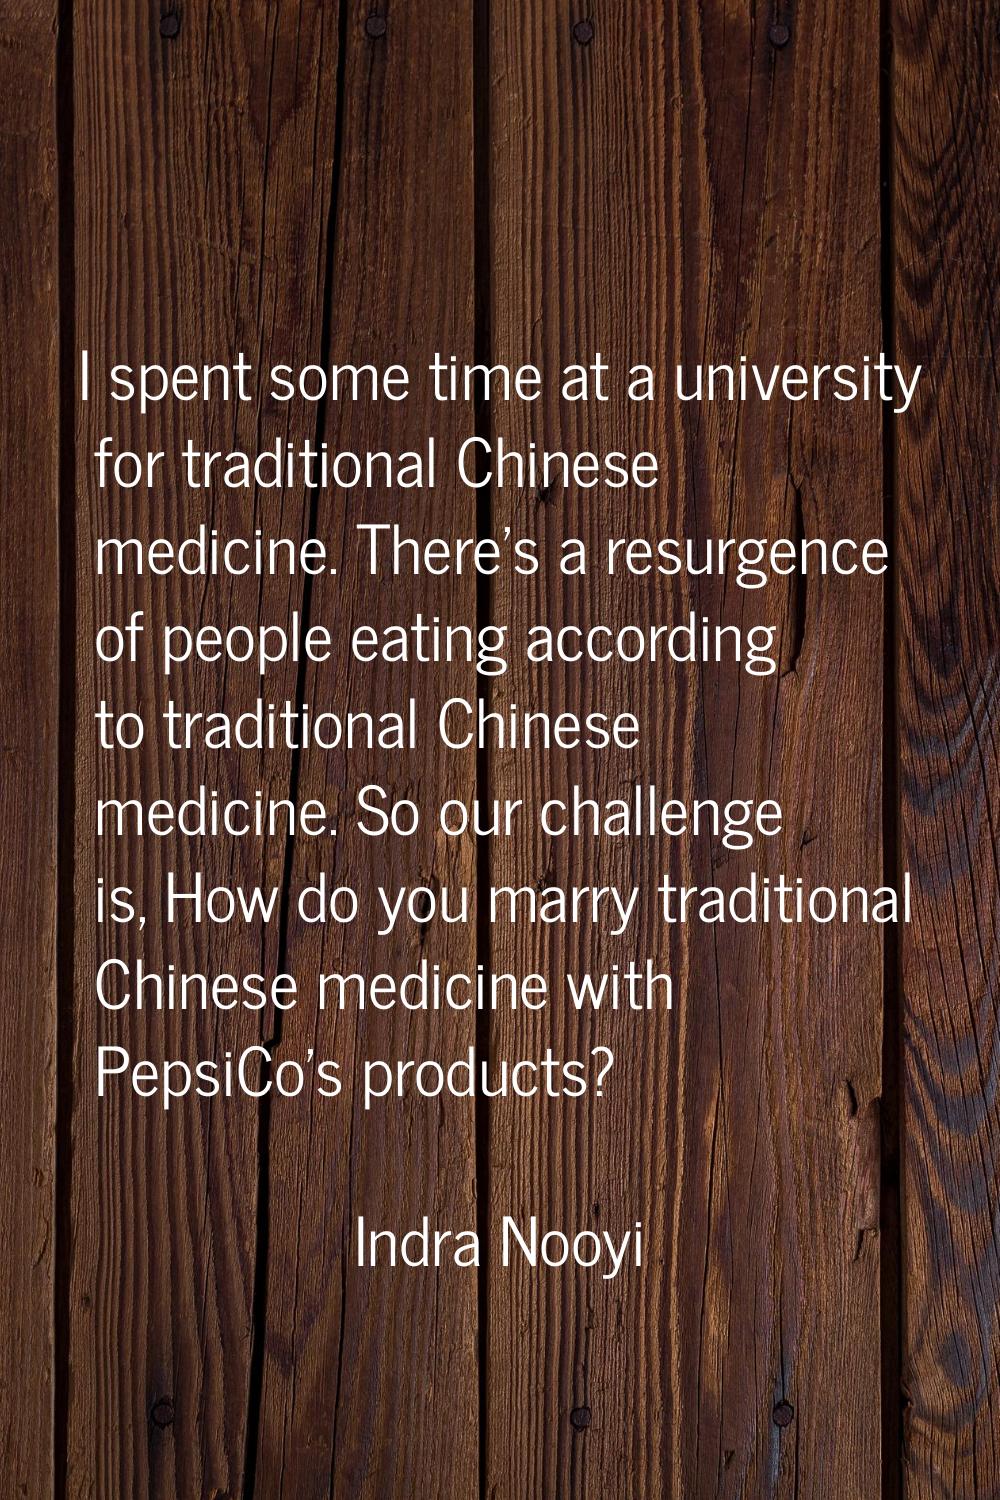 I spent some time at a university for traditional Chinese medicine. There's a resurgence of people 